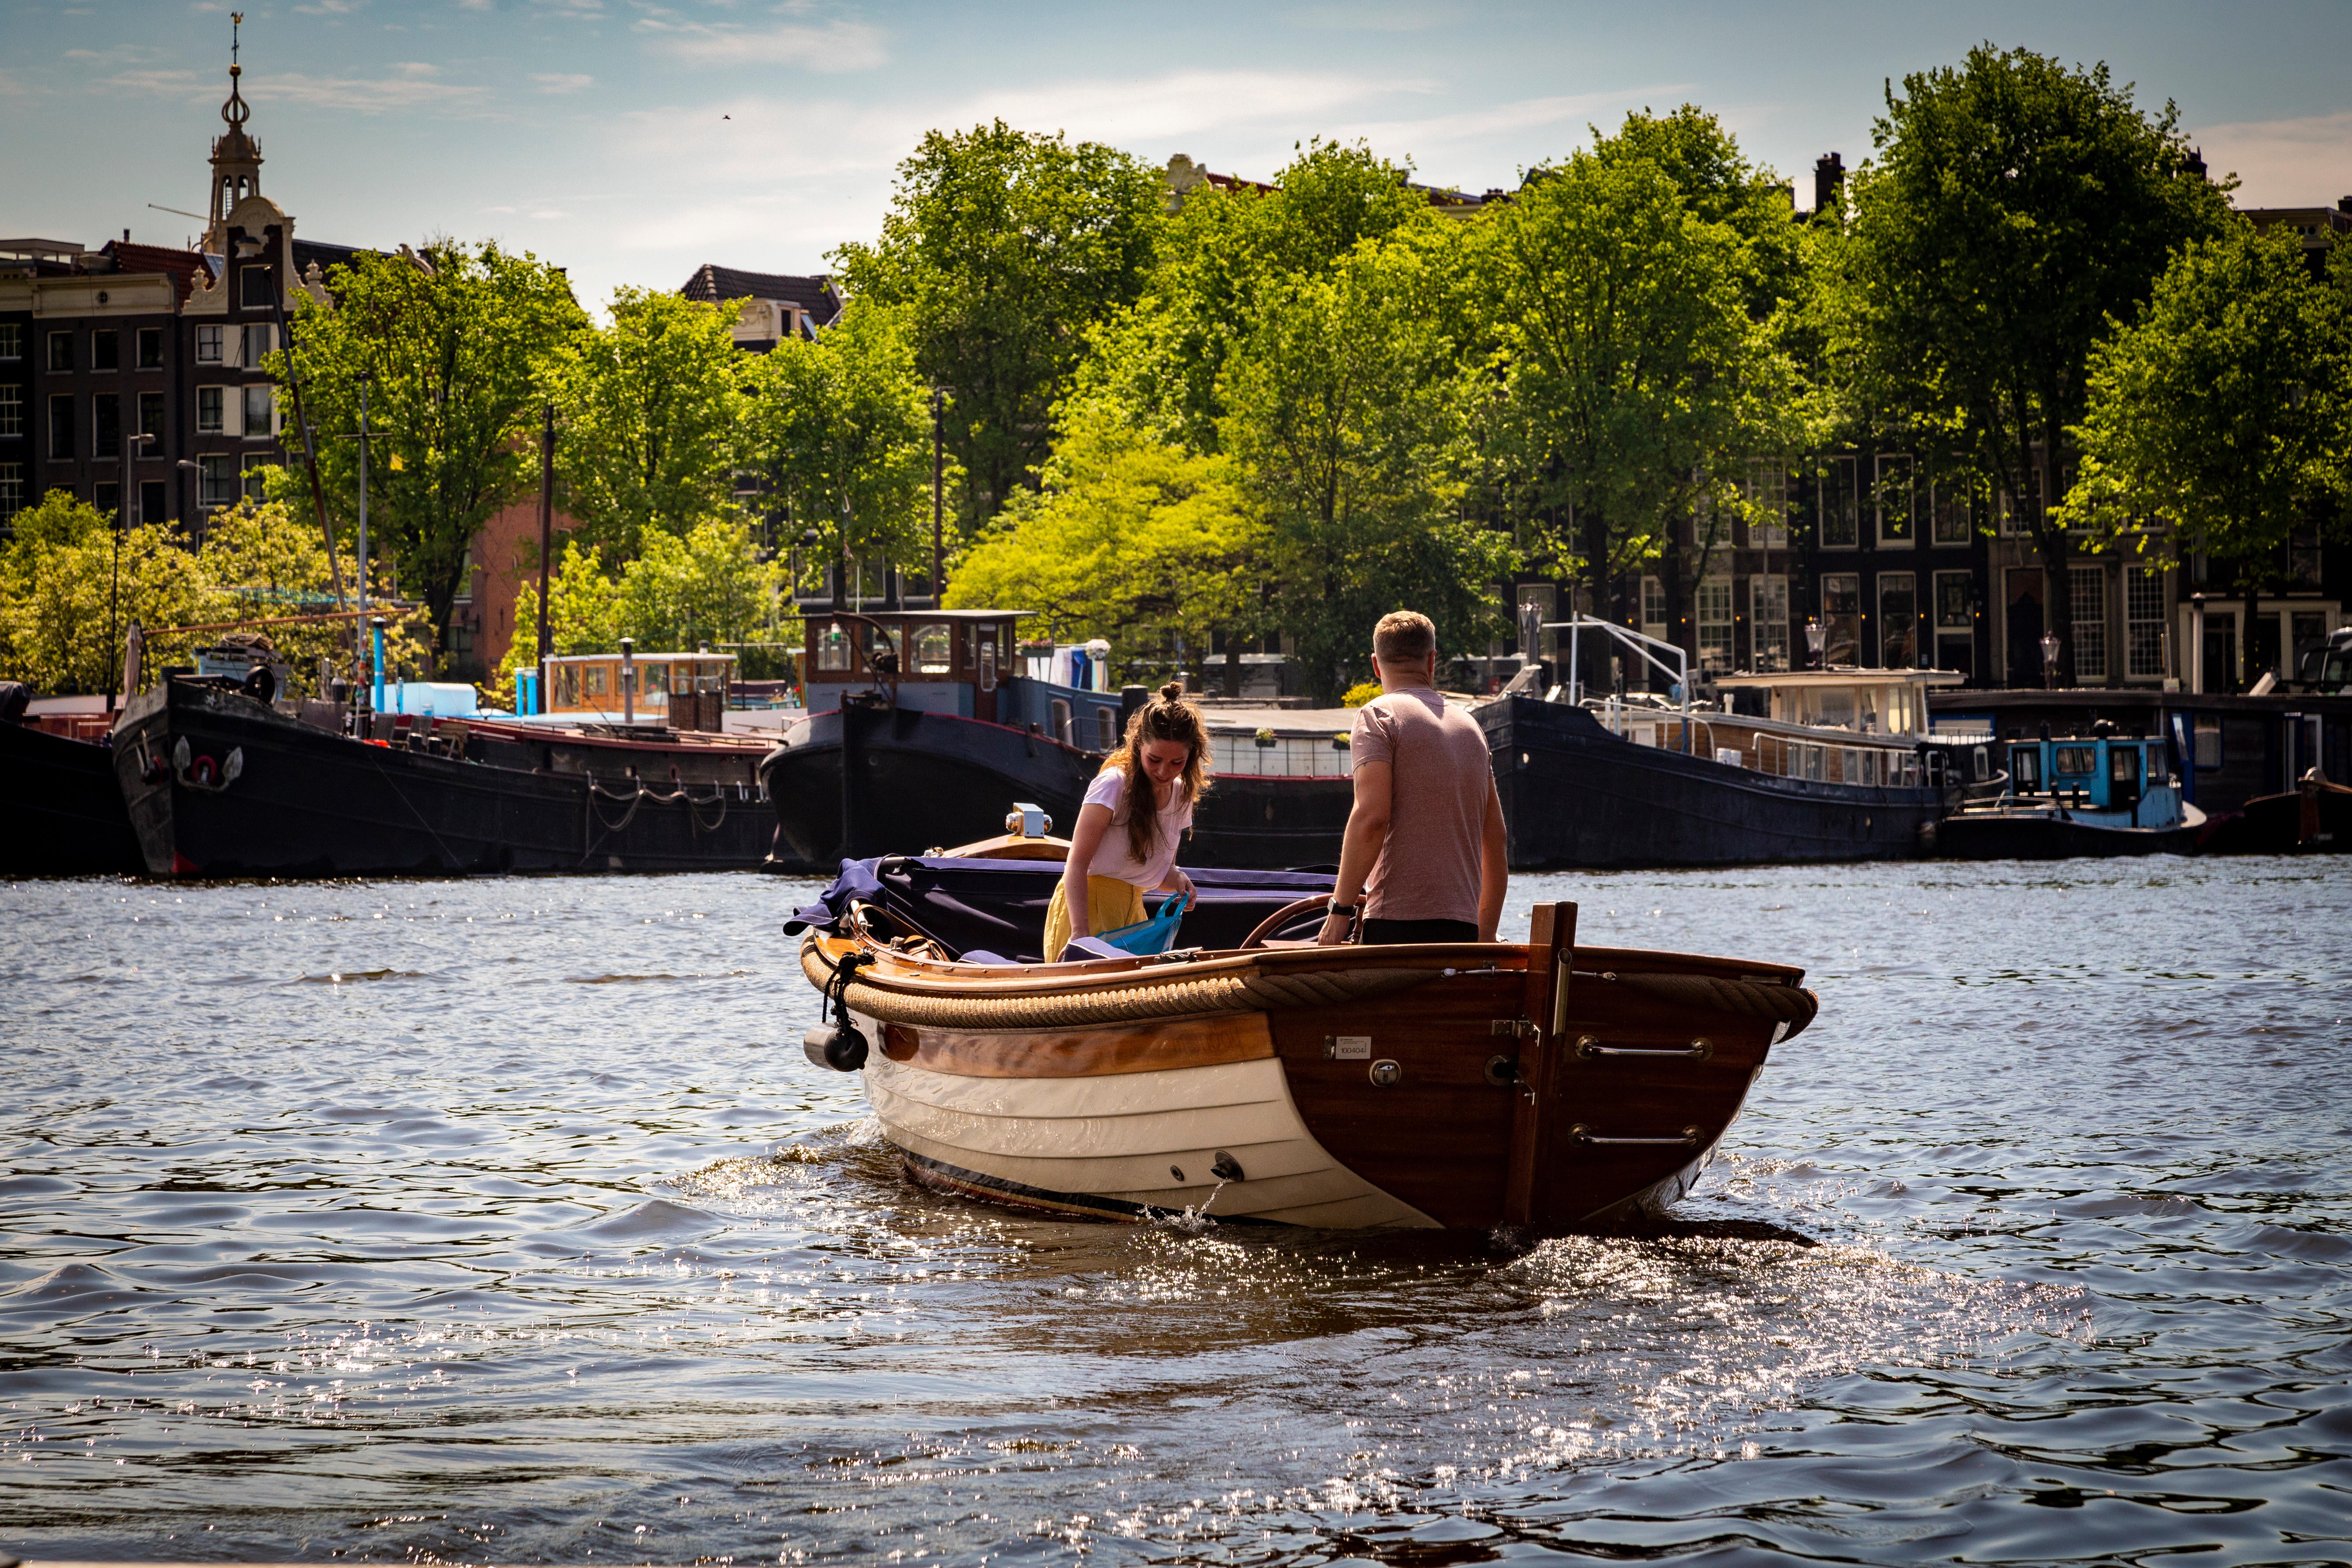 Couple riding a boat in Amsterdam